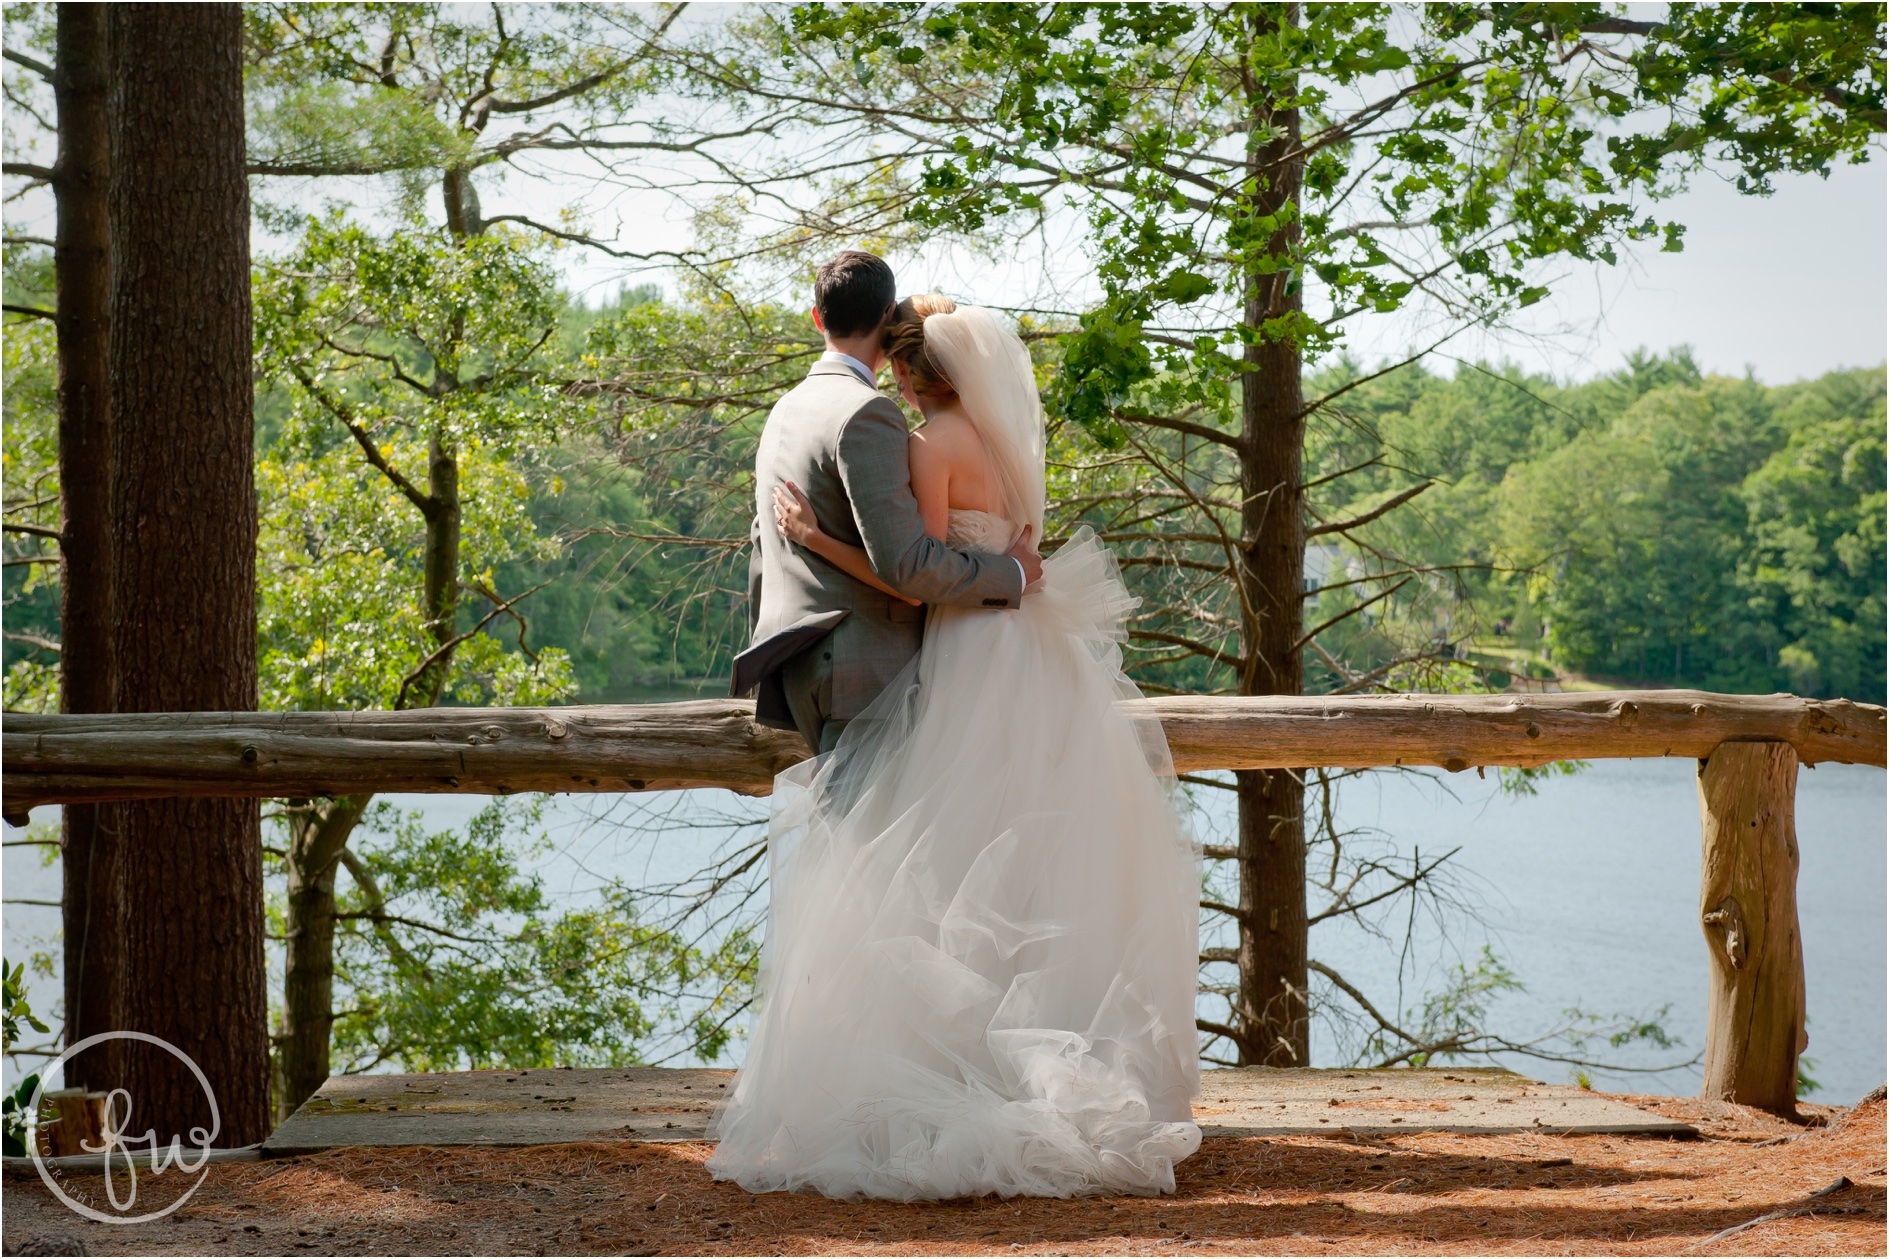 Camp Kiwanee Wedding in Hanson, MA photographed by Freestyle Weddings